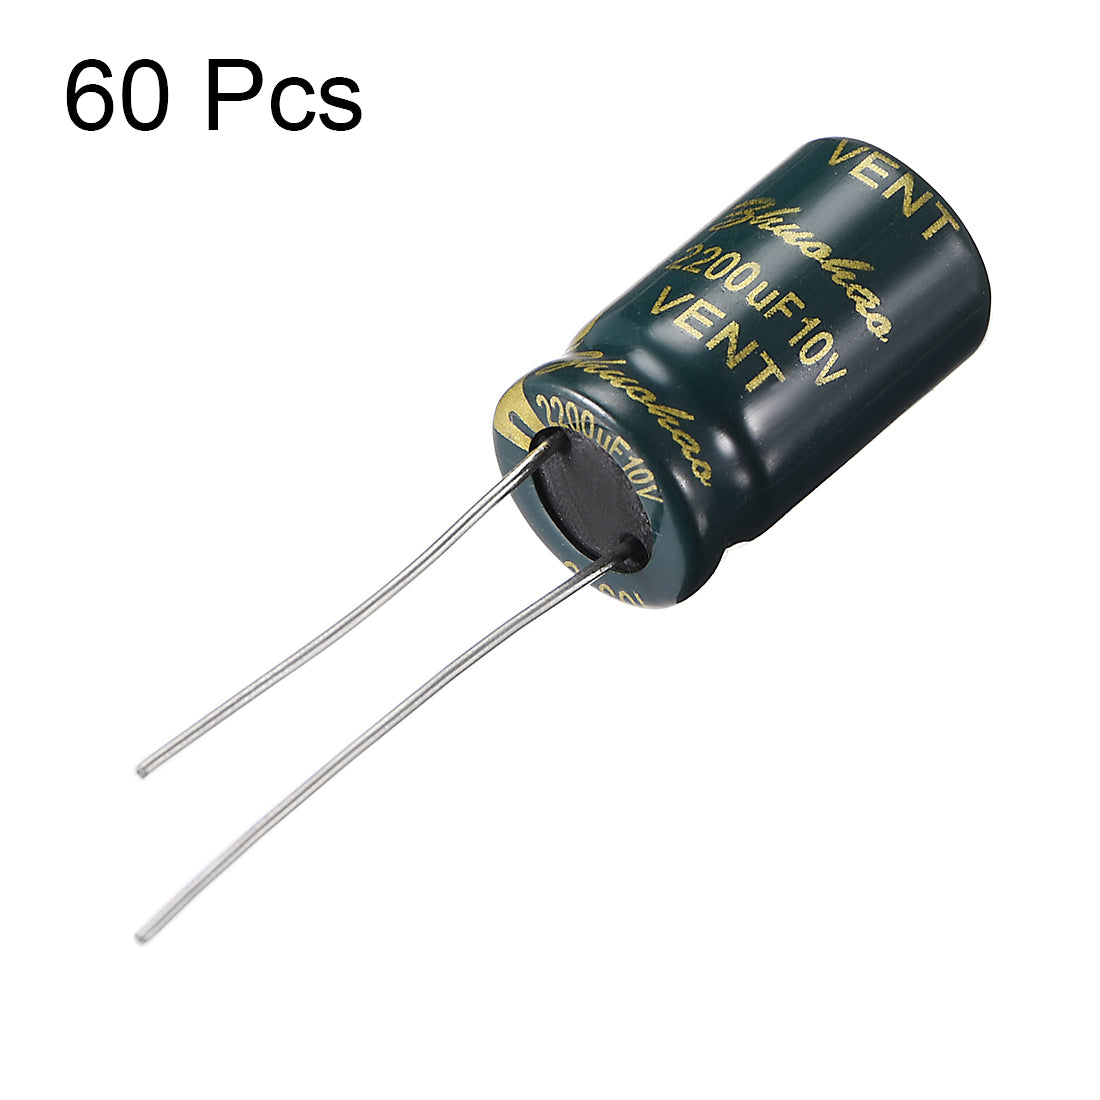 uxcell Uxcell Aluminum Radial Electrolytic Capacitor Low ESR Green with 2200UF 10V 105 Celsius Life 3000H 10 x 17 mm High Ripple Current,Low Impedance 60pcs